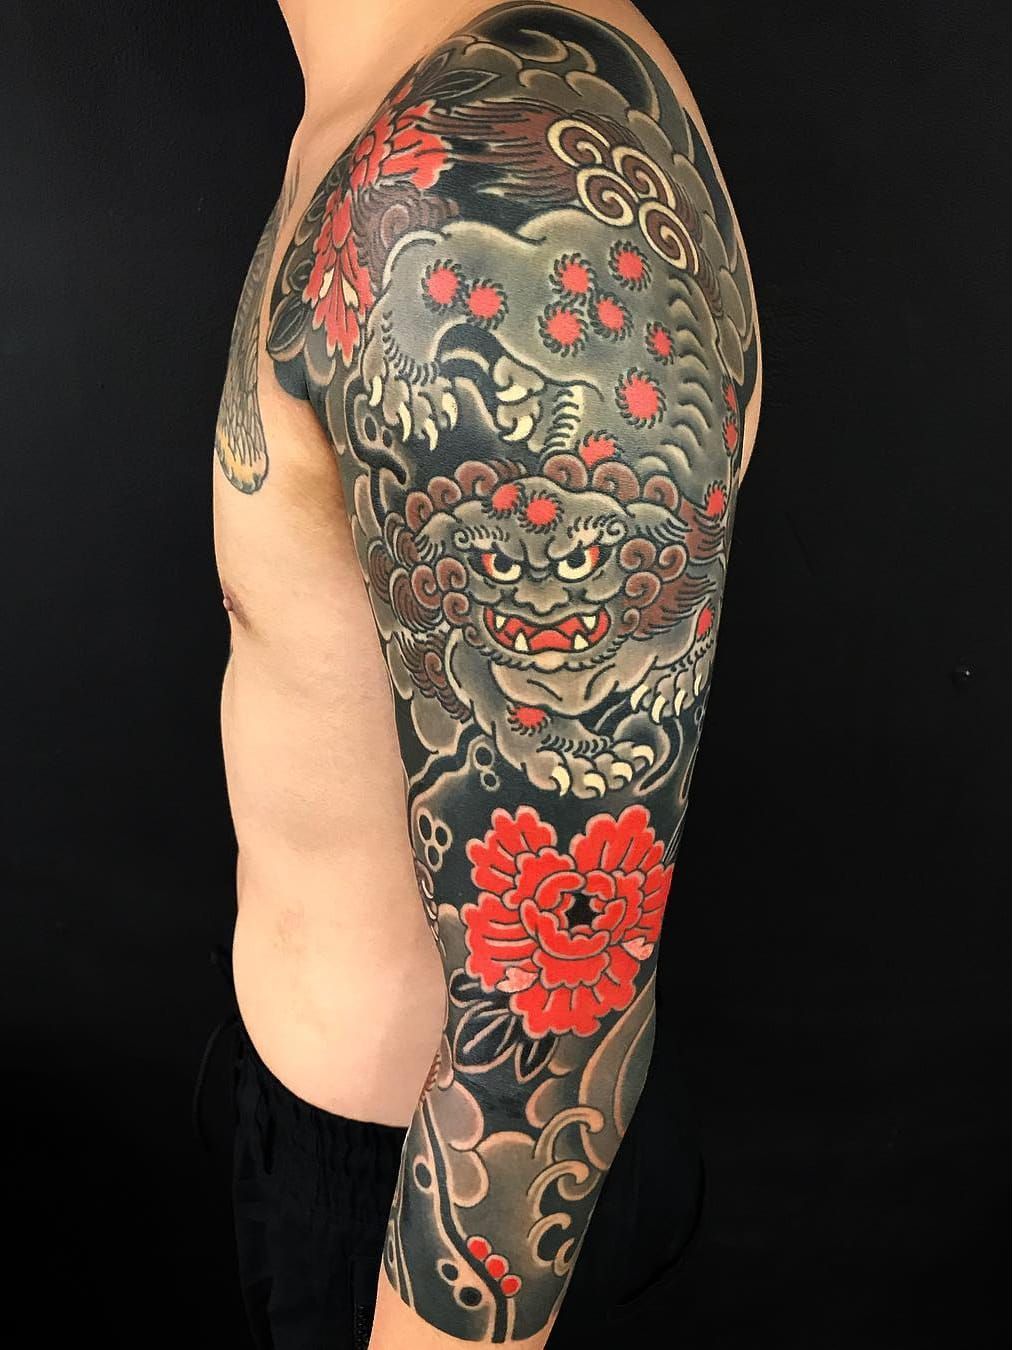 Geoff Funk  Top Vancouver Tattoo Artist  The Fall